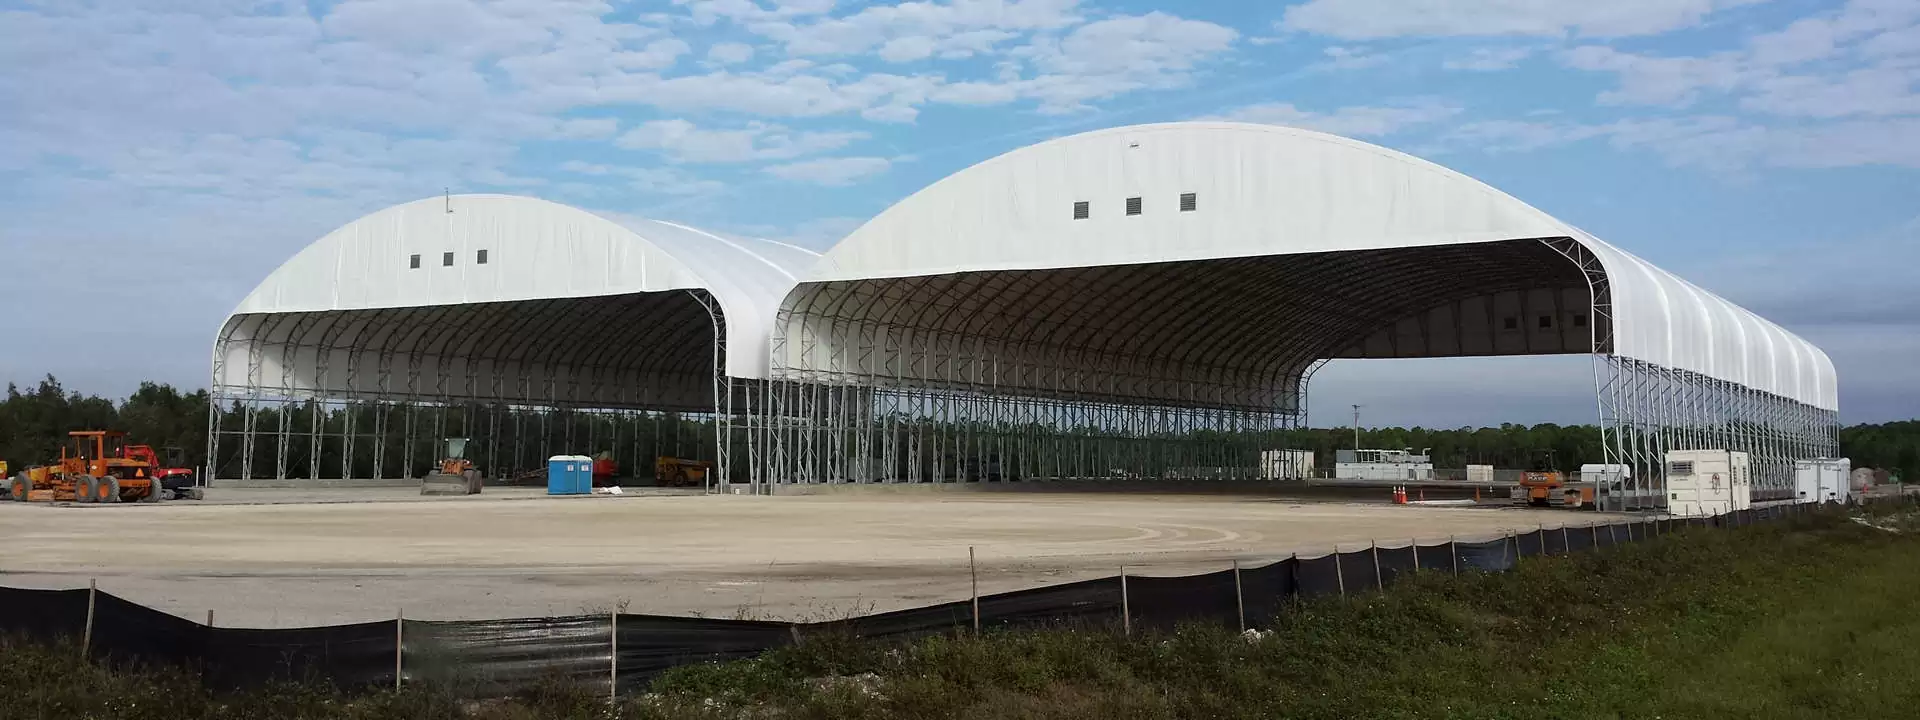 Industrial Tent Structures | Big Top Fabric Structures